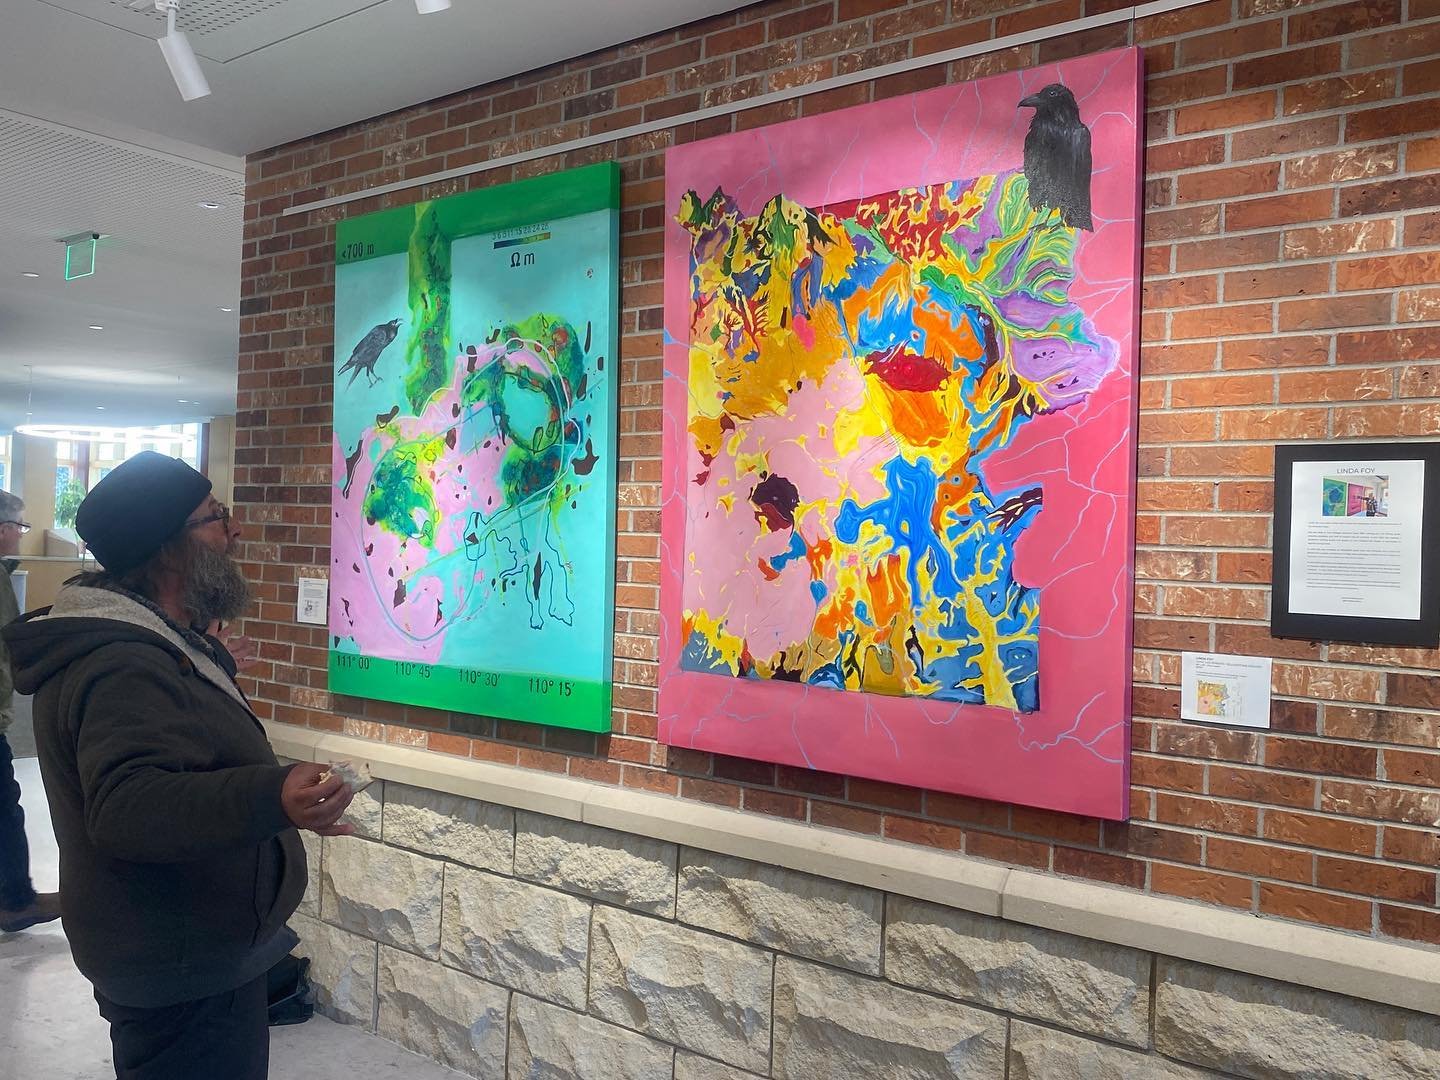 My Yellowstone National Park geology and hydrology map paintings are now at the Bozeman Public Library for the month of May.  626 E Main St, Bozeman, MT.  This exhibit features a group of female artists that met at a Montana Arts Council Artrepreneur